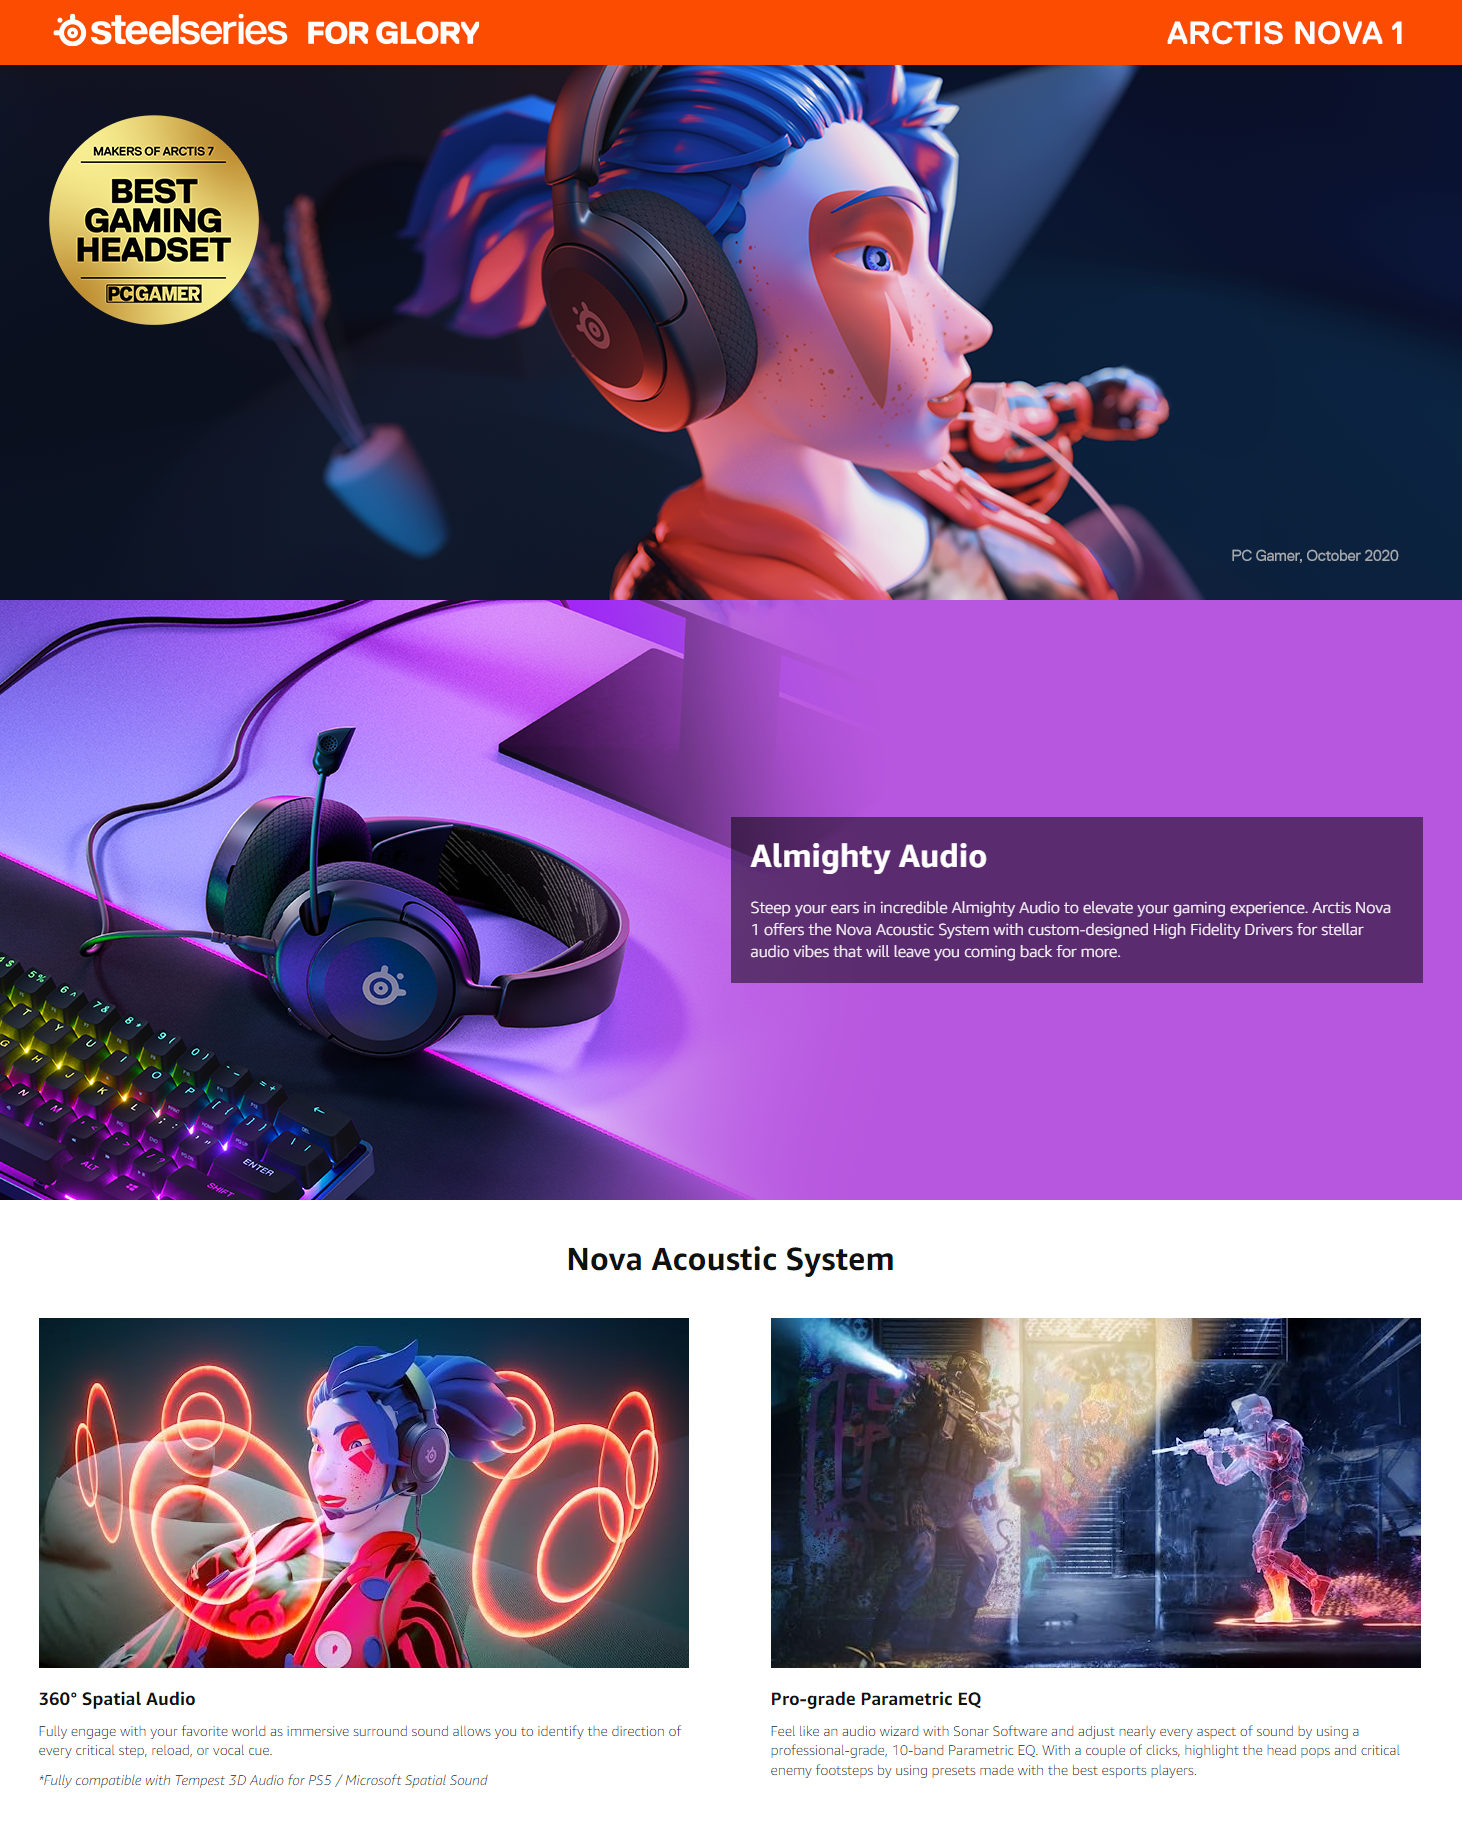 Arctis Nova 1, The Gaming Headset for PC with Almighty Audio